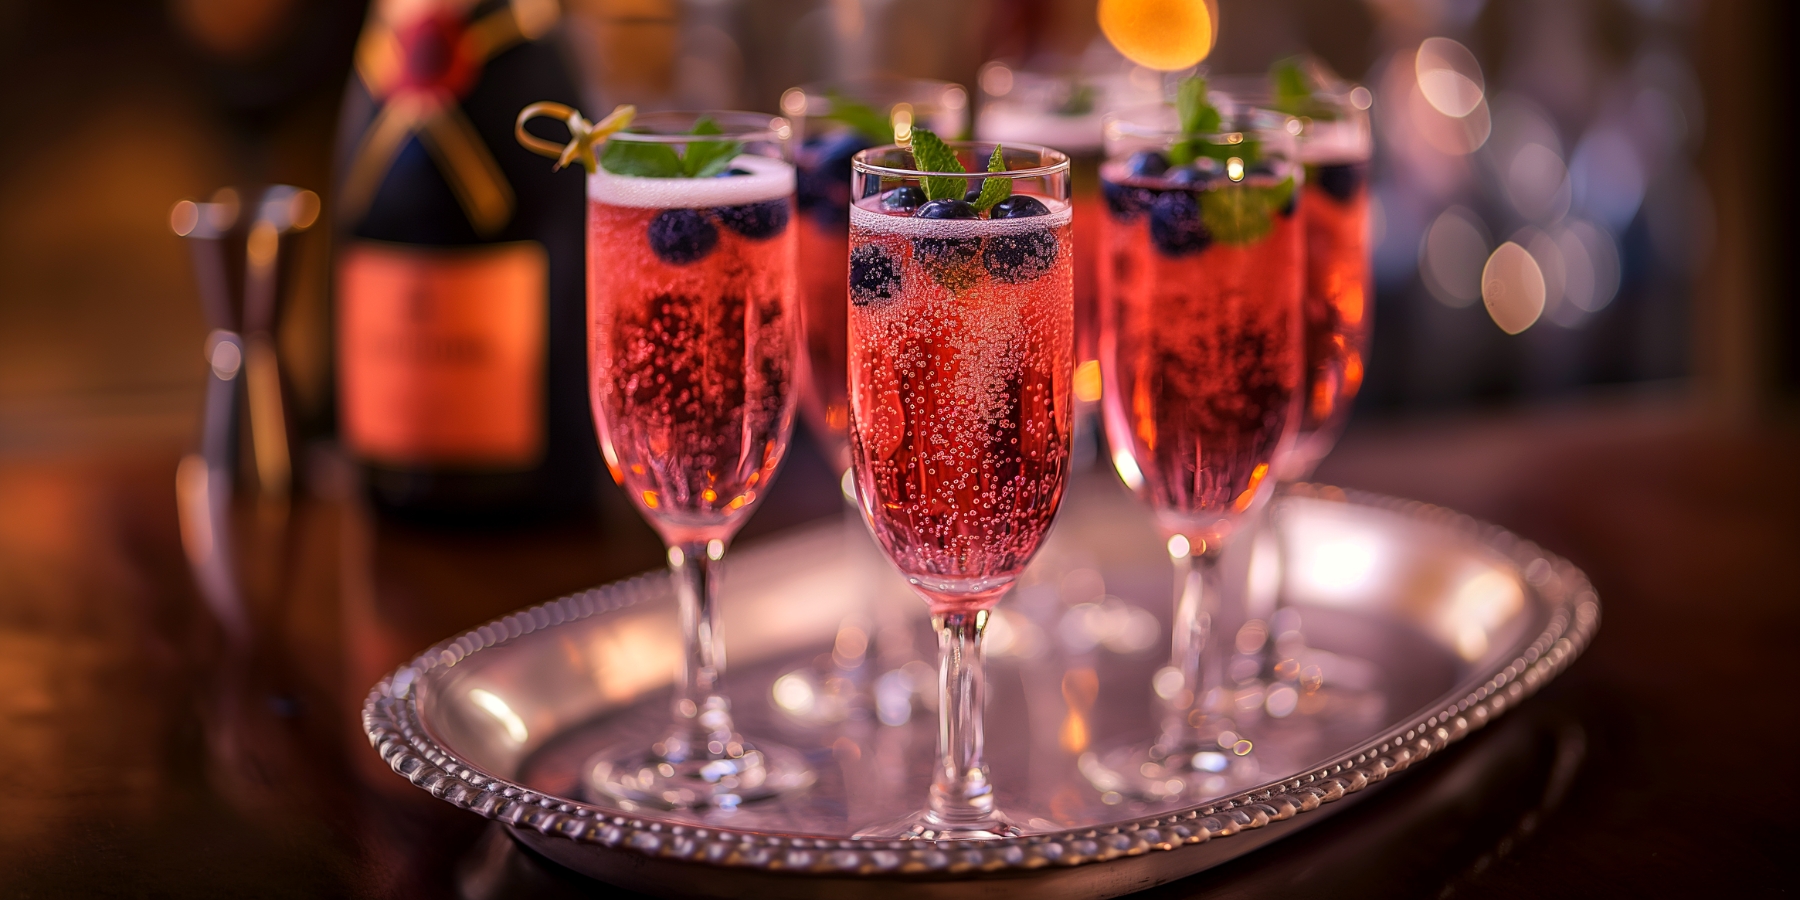 Flutes of blueberry juice and Champagne cocktails served on a silver tray